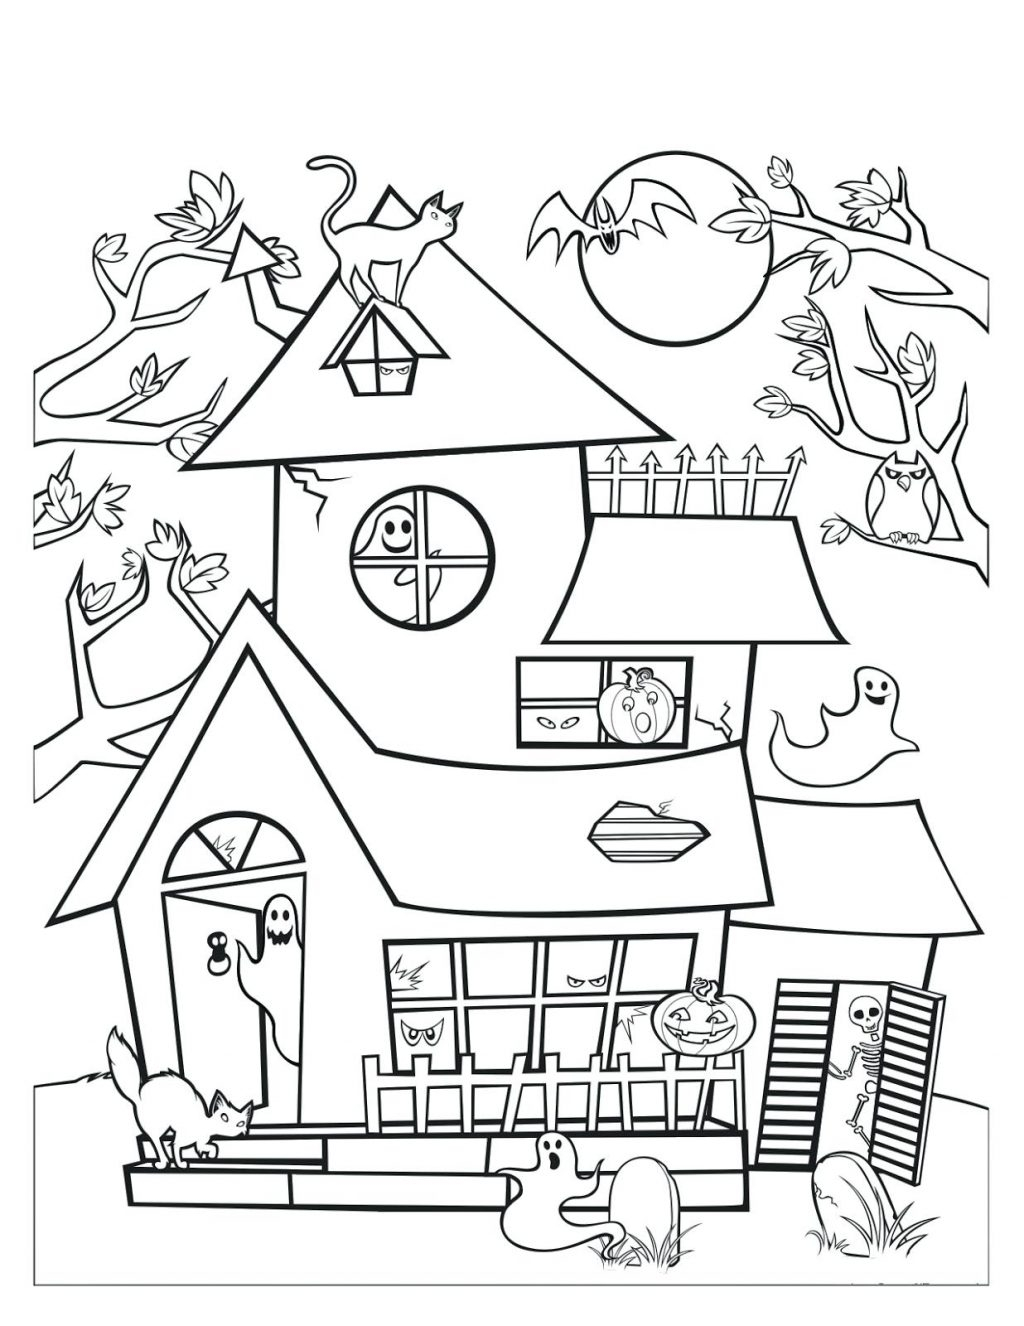 Mansion Coloring Pages Coloring Page House Coloring Sheet Haunted Mansion Pages Colouring